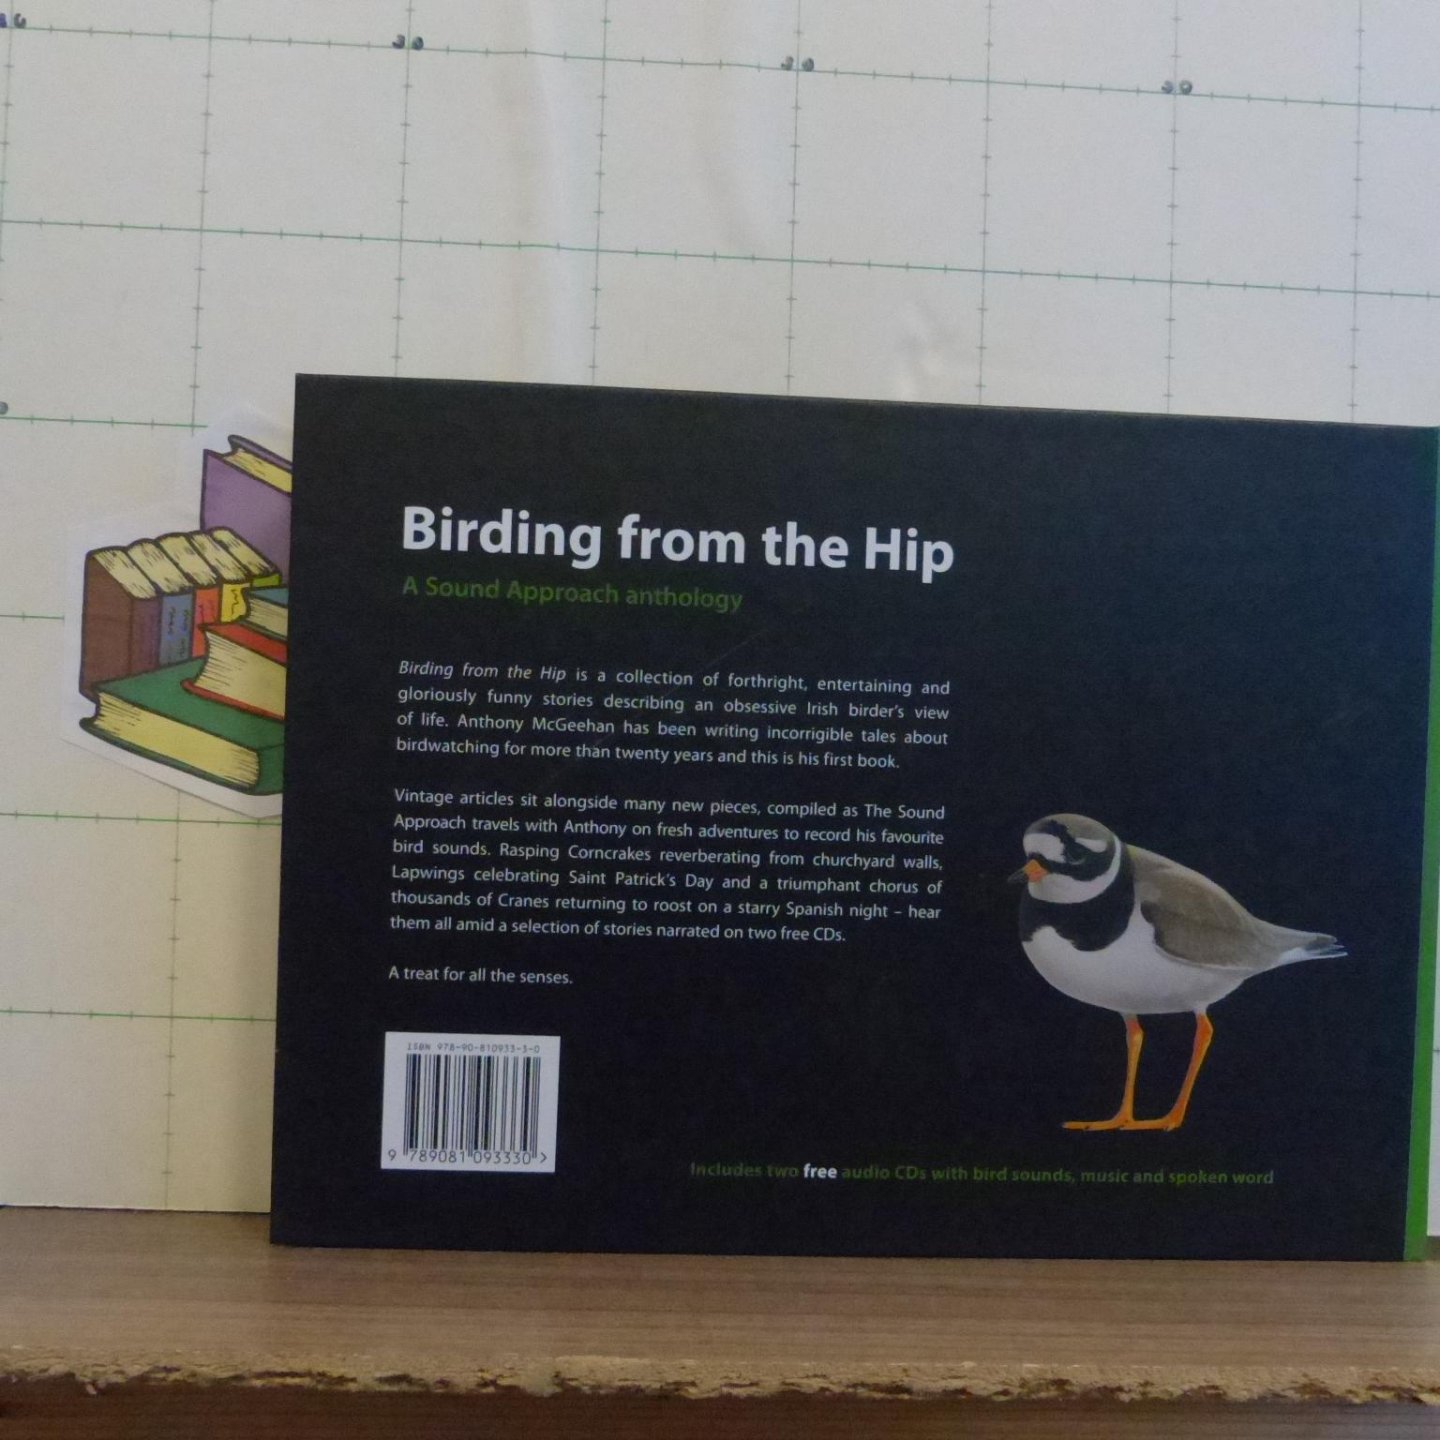 McGeehan, Anthony - the sound approach - birding from the hip, a sound approach anthology